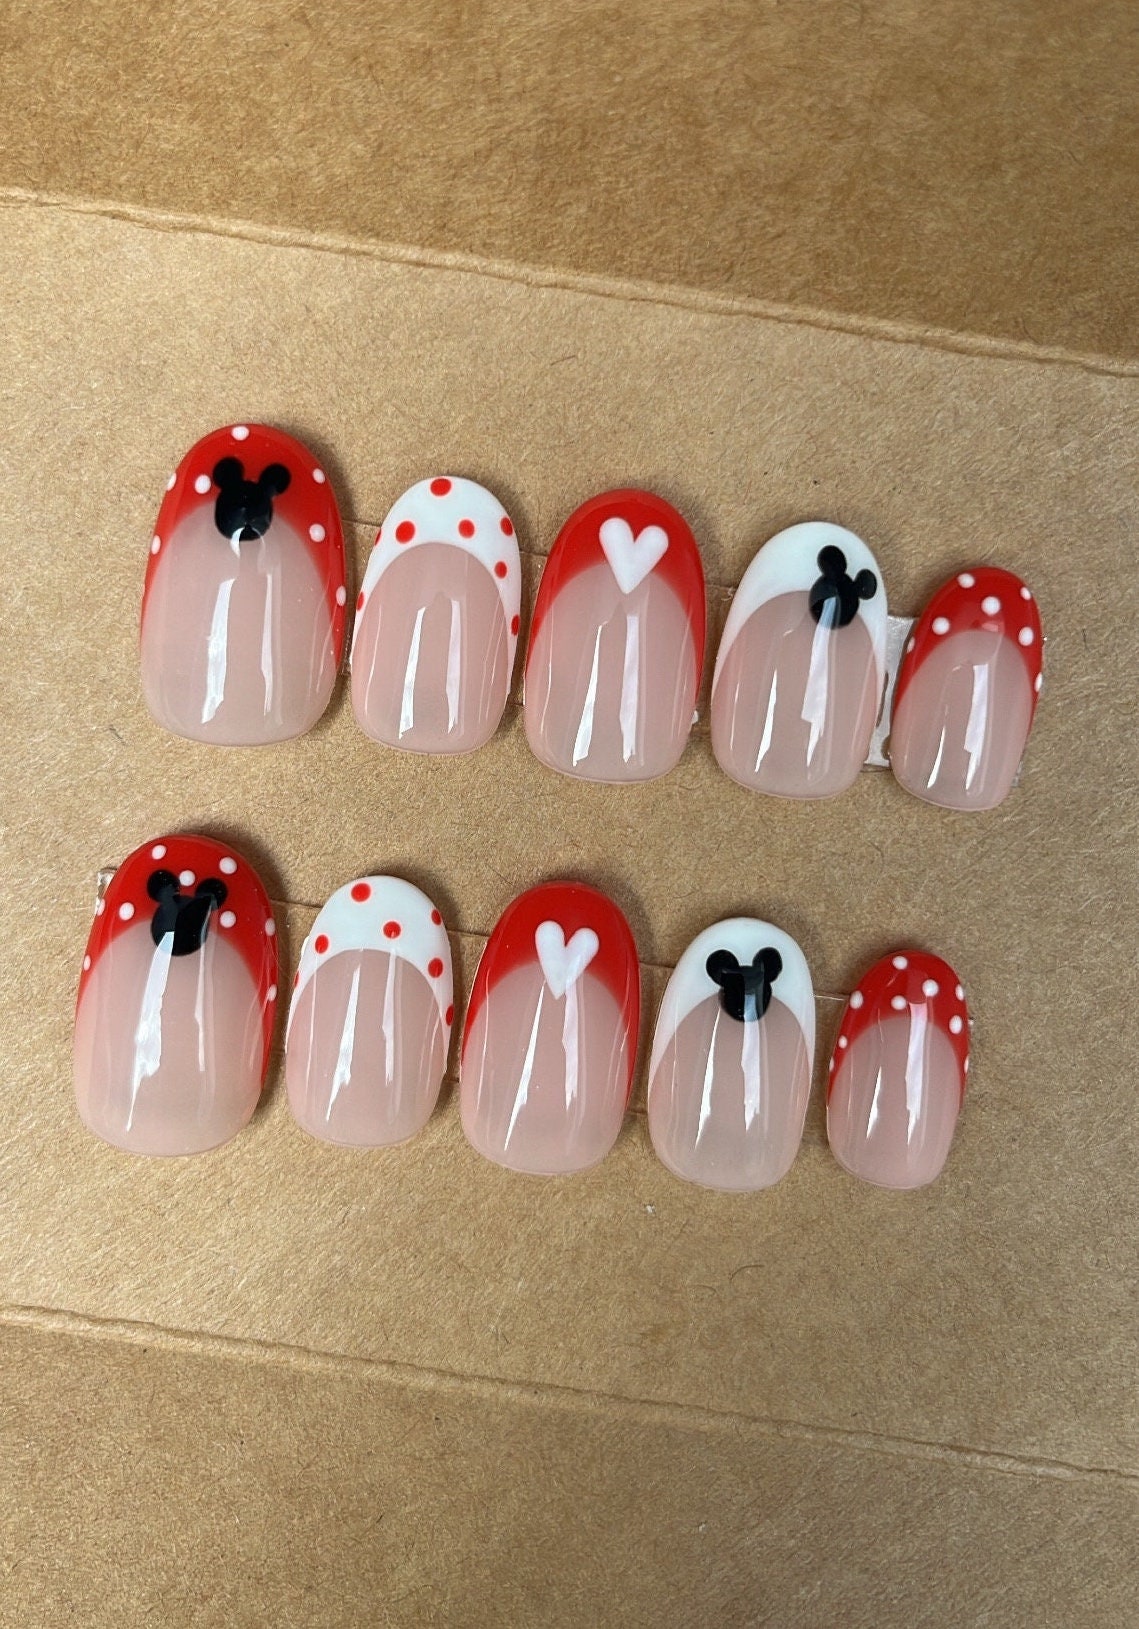 $5.63 - Minnie Mouse Disney nail transfers - illustrated nail art